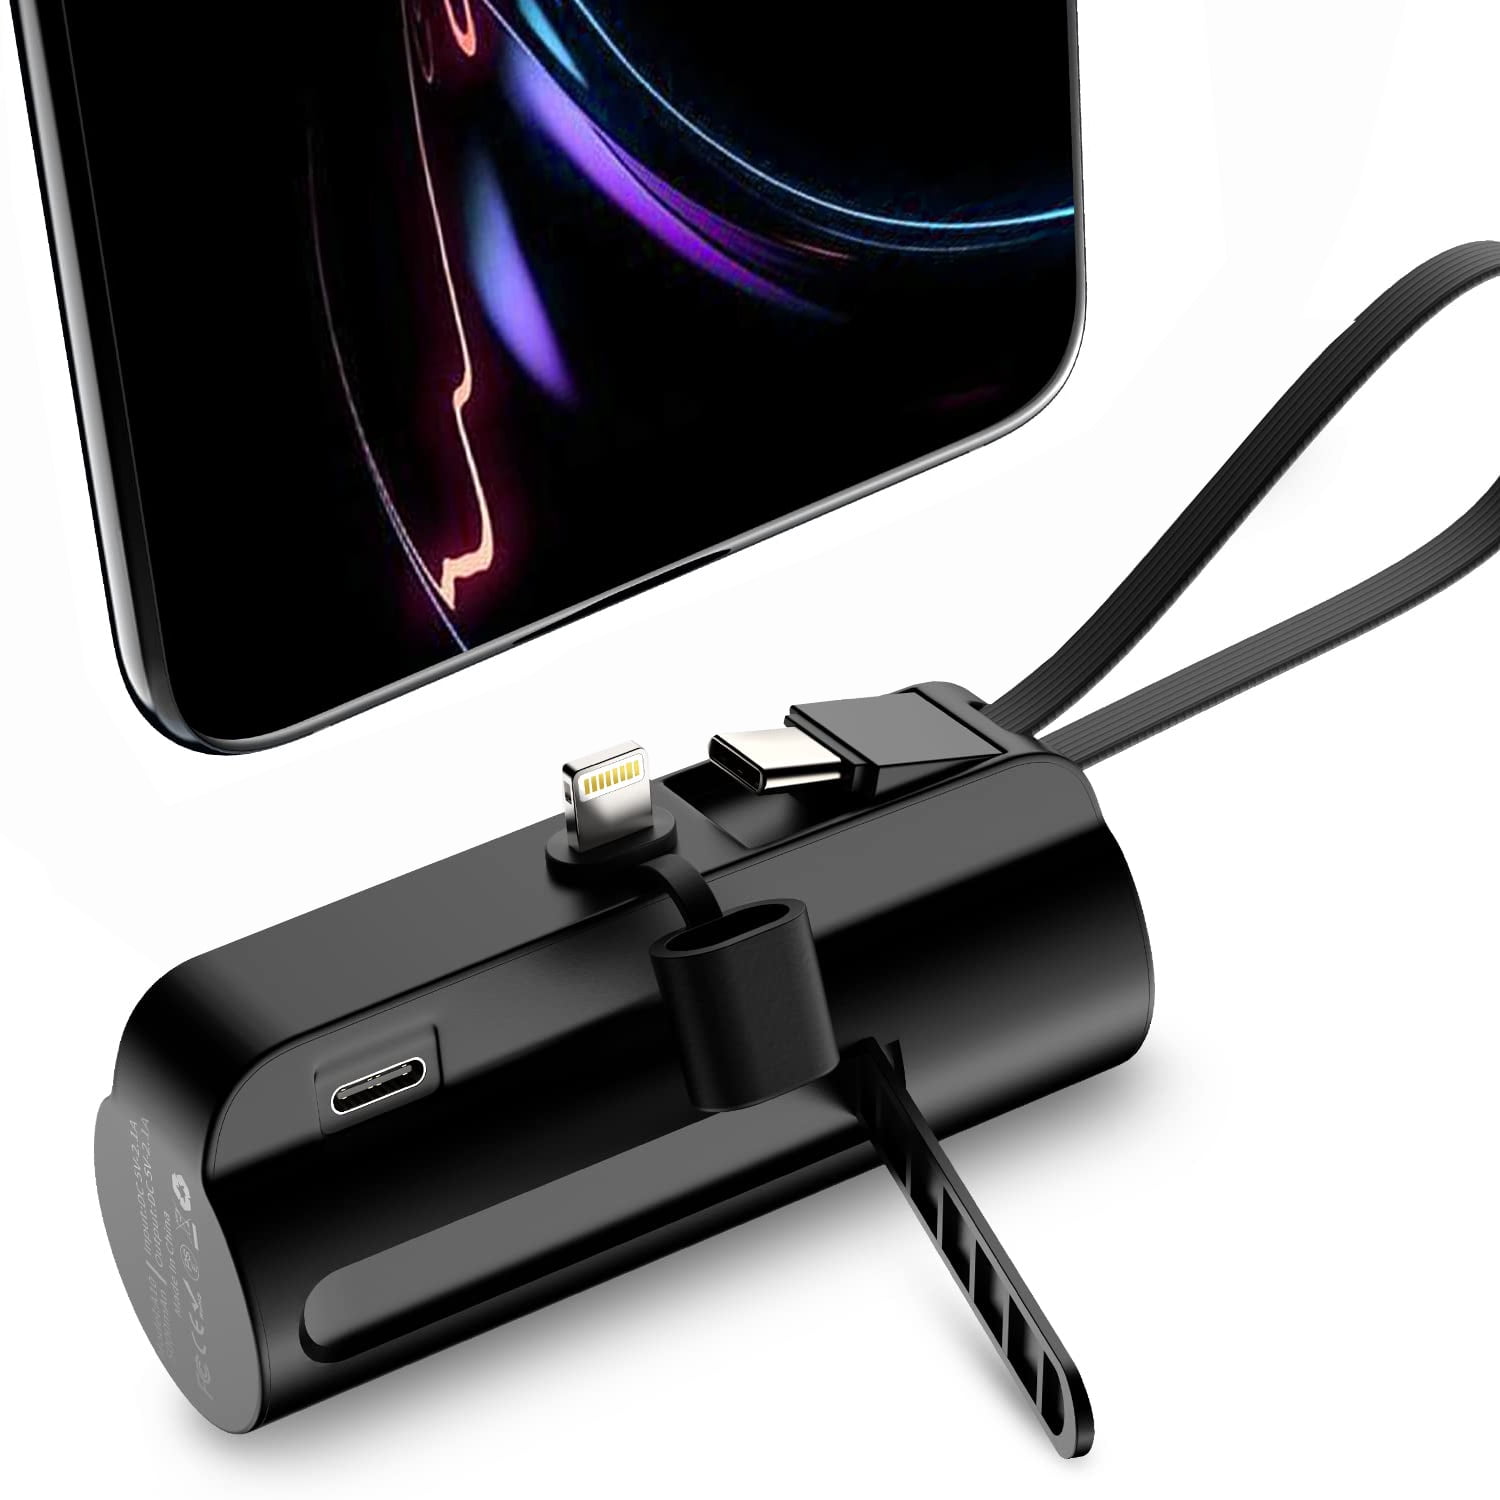  UGREEN Portable Charger 10000mAh USB-C Power Bank PD 20W,  Portable Charger Power Bank for Samsung Galaxy S23/S22/S21/S10, iPhone 13  Series/iPhone 12 Series, iPad, and More (USB C to A Cable Included) 